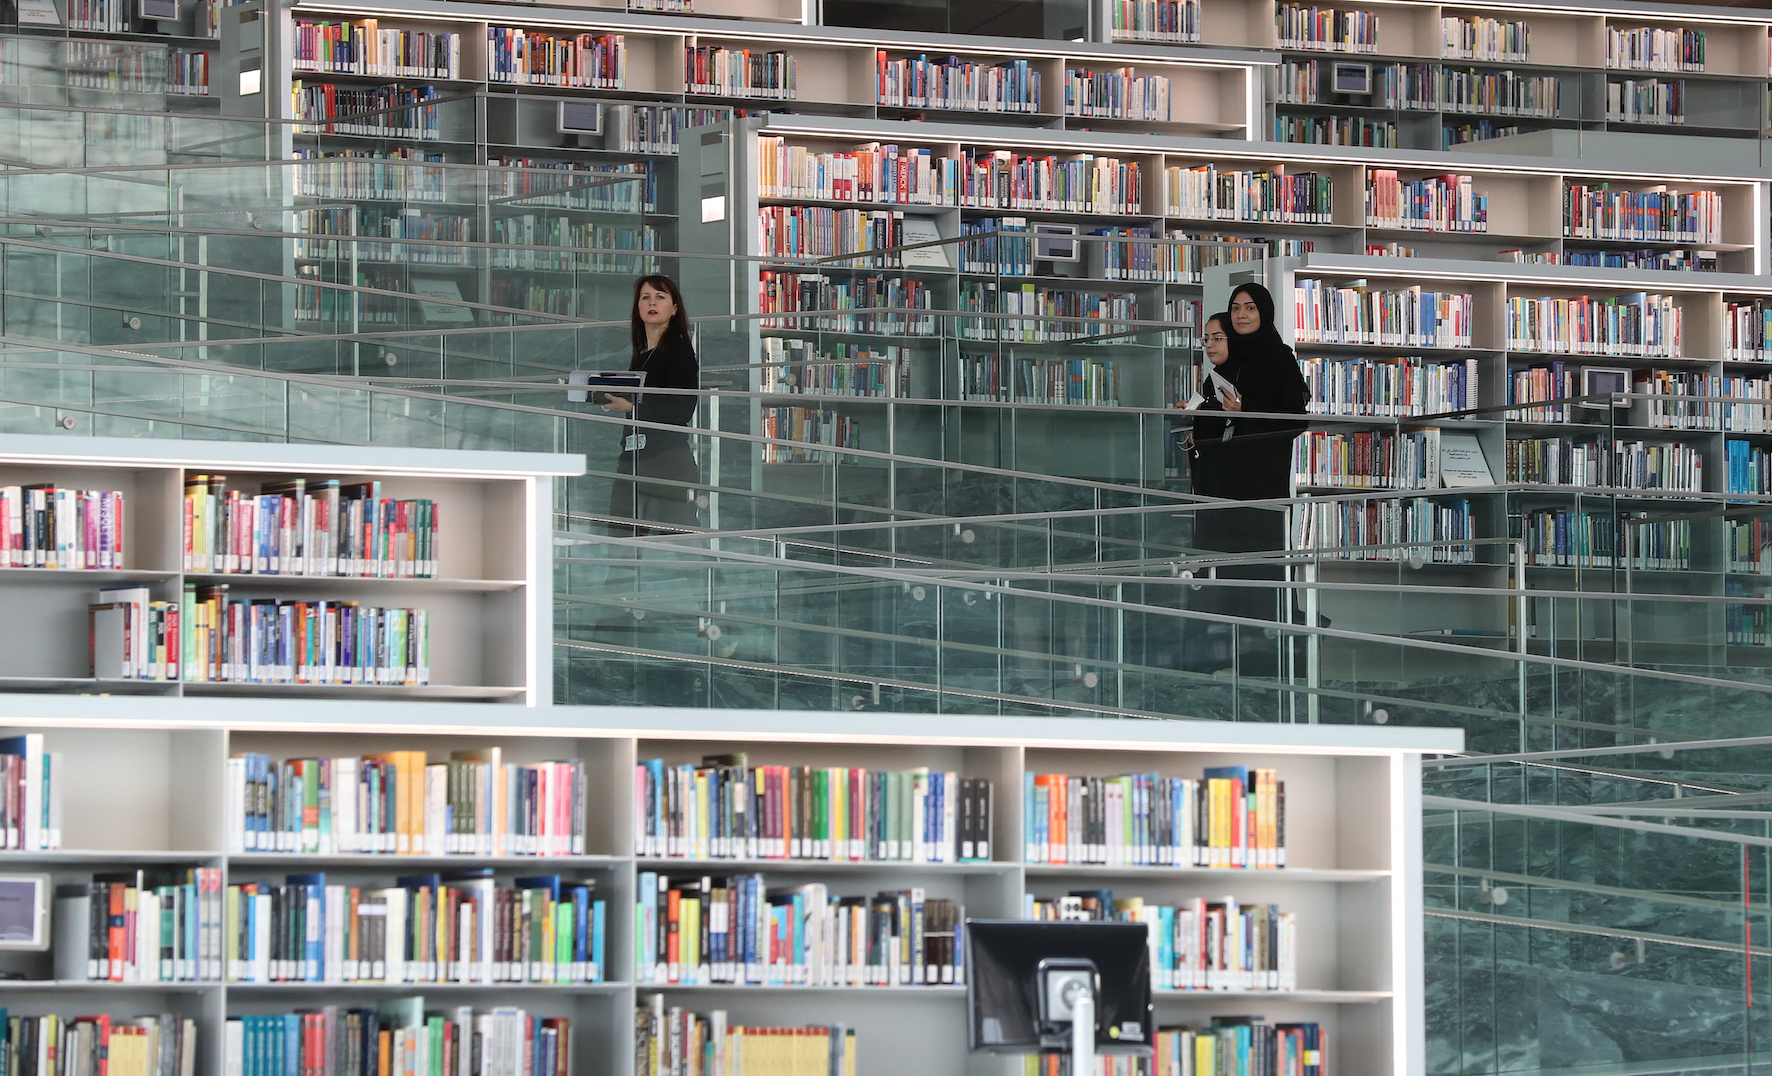 A view of the interior of the Qatar National Library (AFP/ Karim Jaafar)